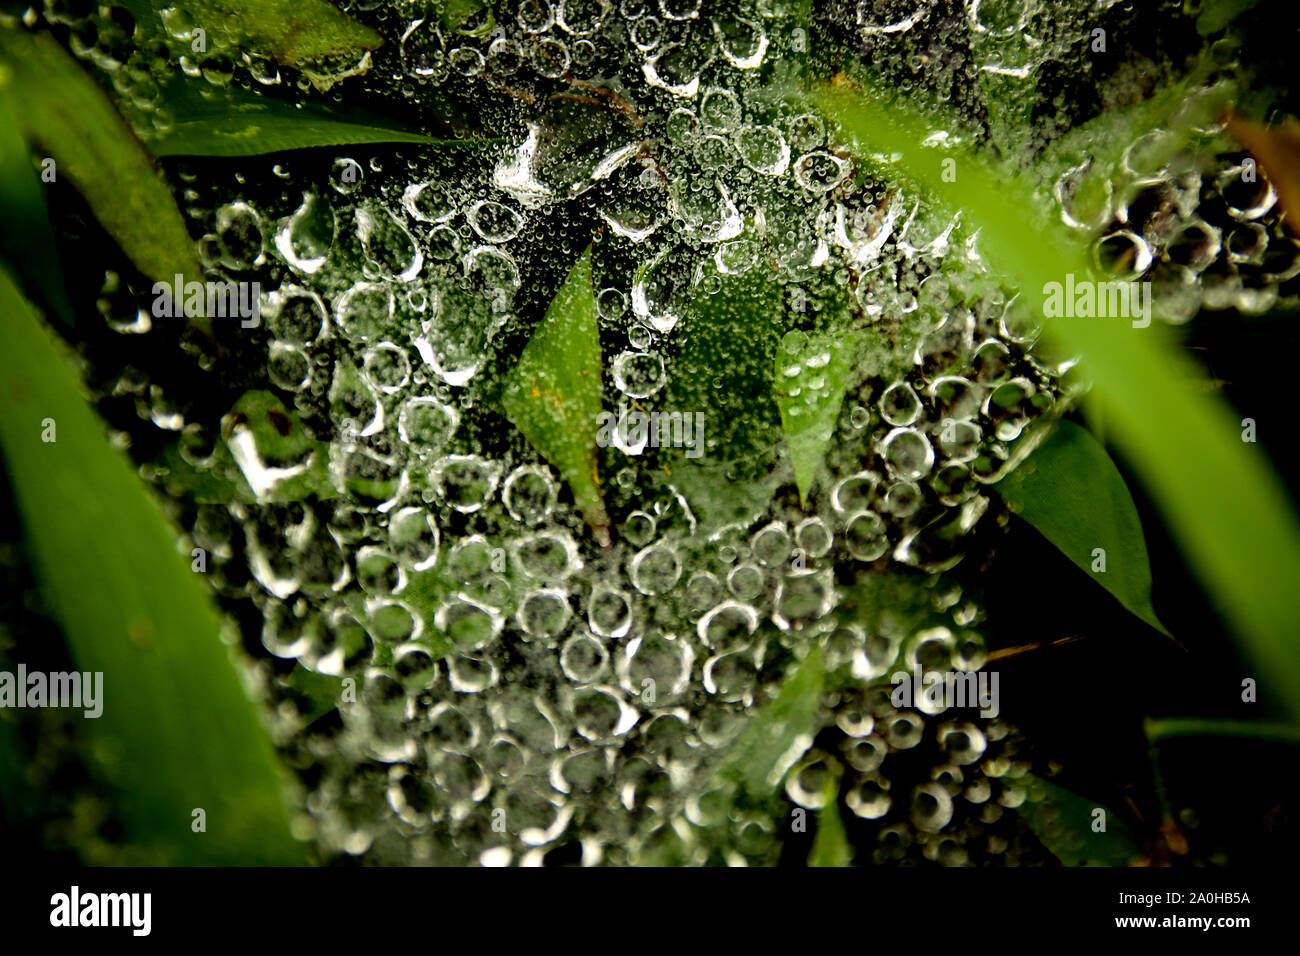 Morning dew caught in green grasses showing the abstract patterns and textures in nature, freshness, wellness and harmony Stock Photo